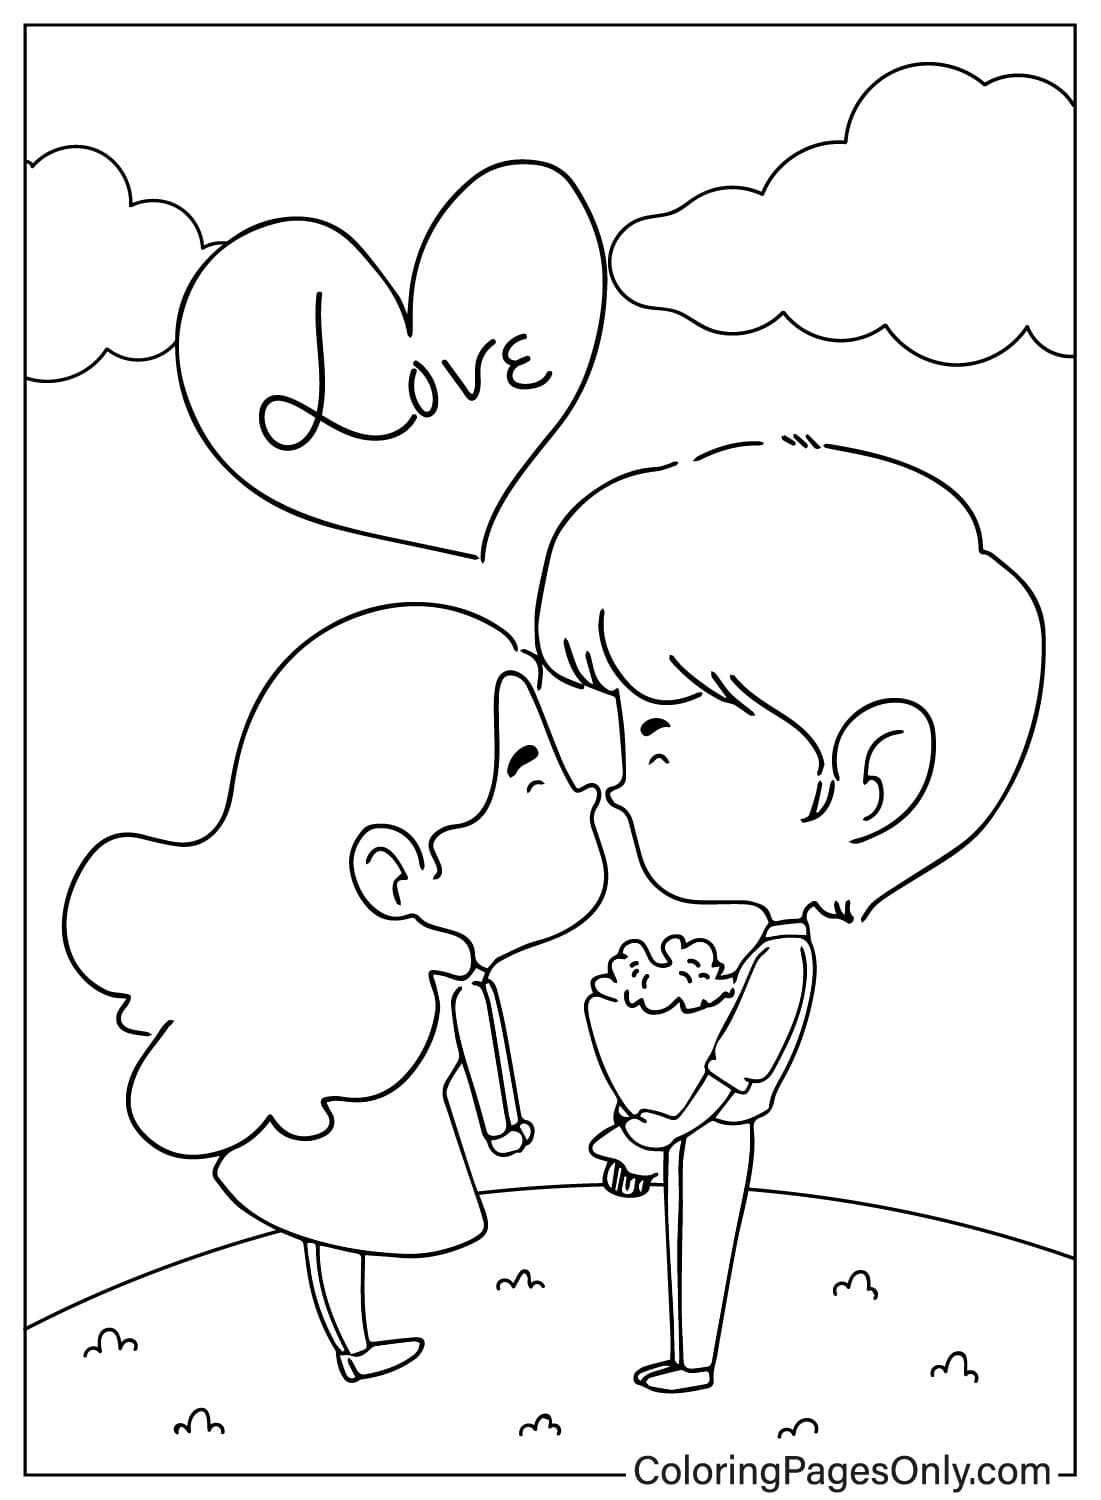 Valentines Day Free Coloring Page from Valentine's Day